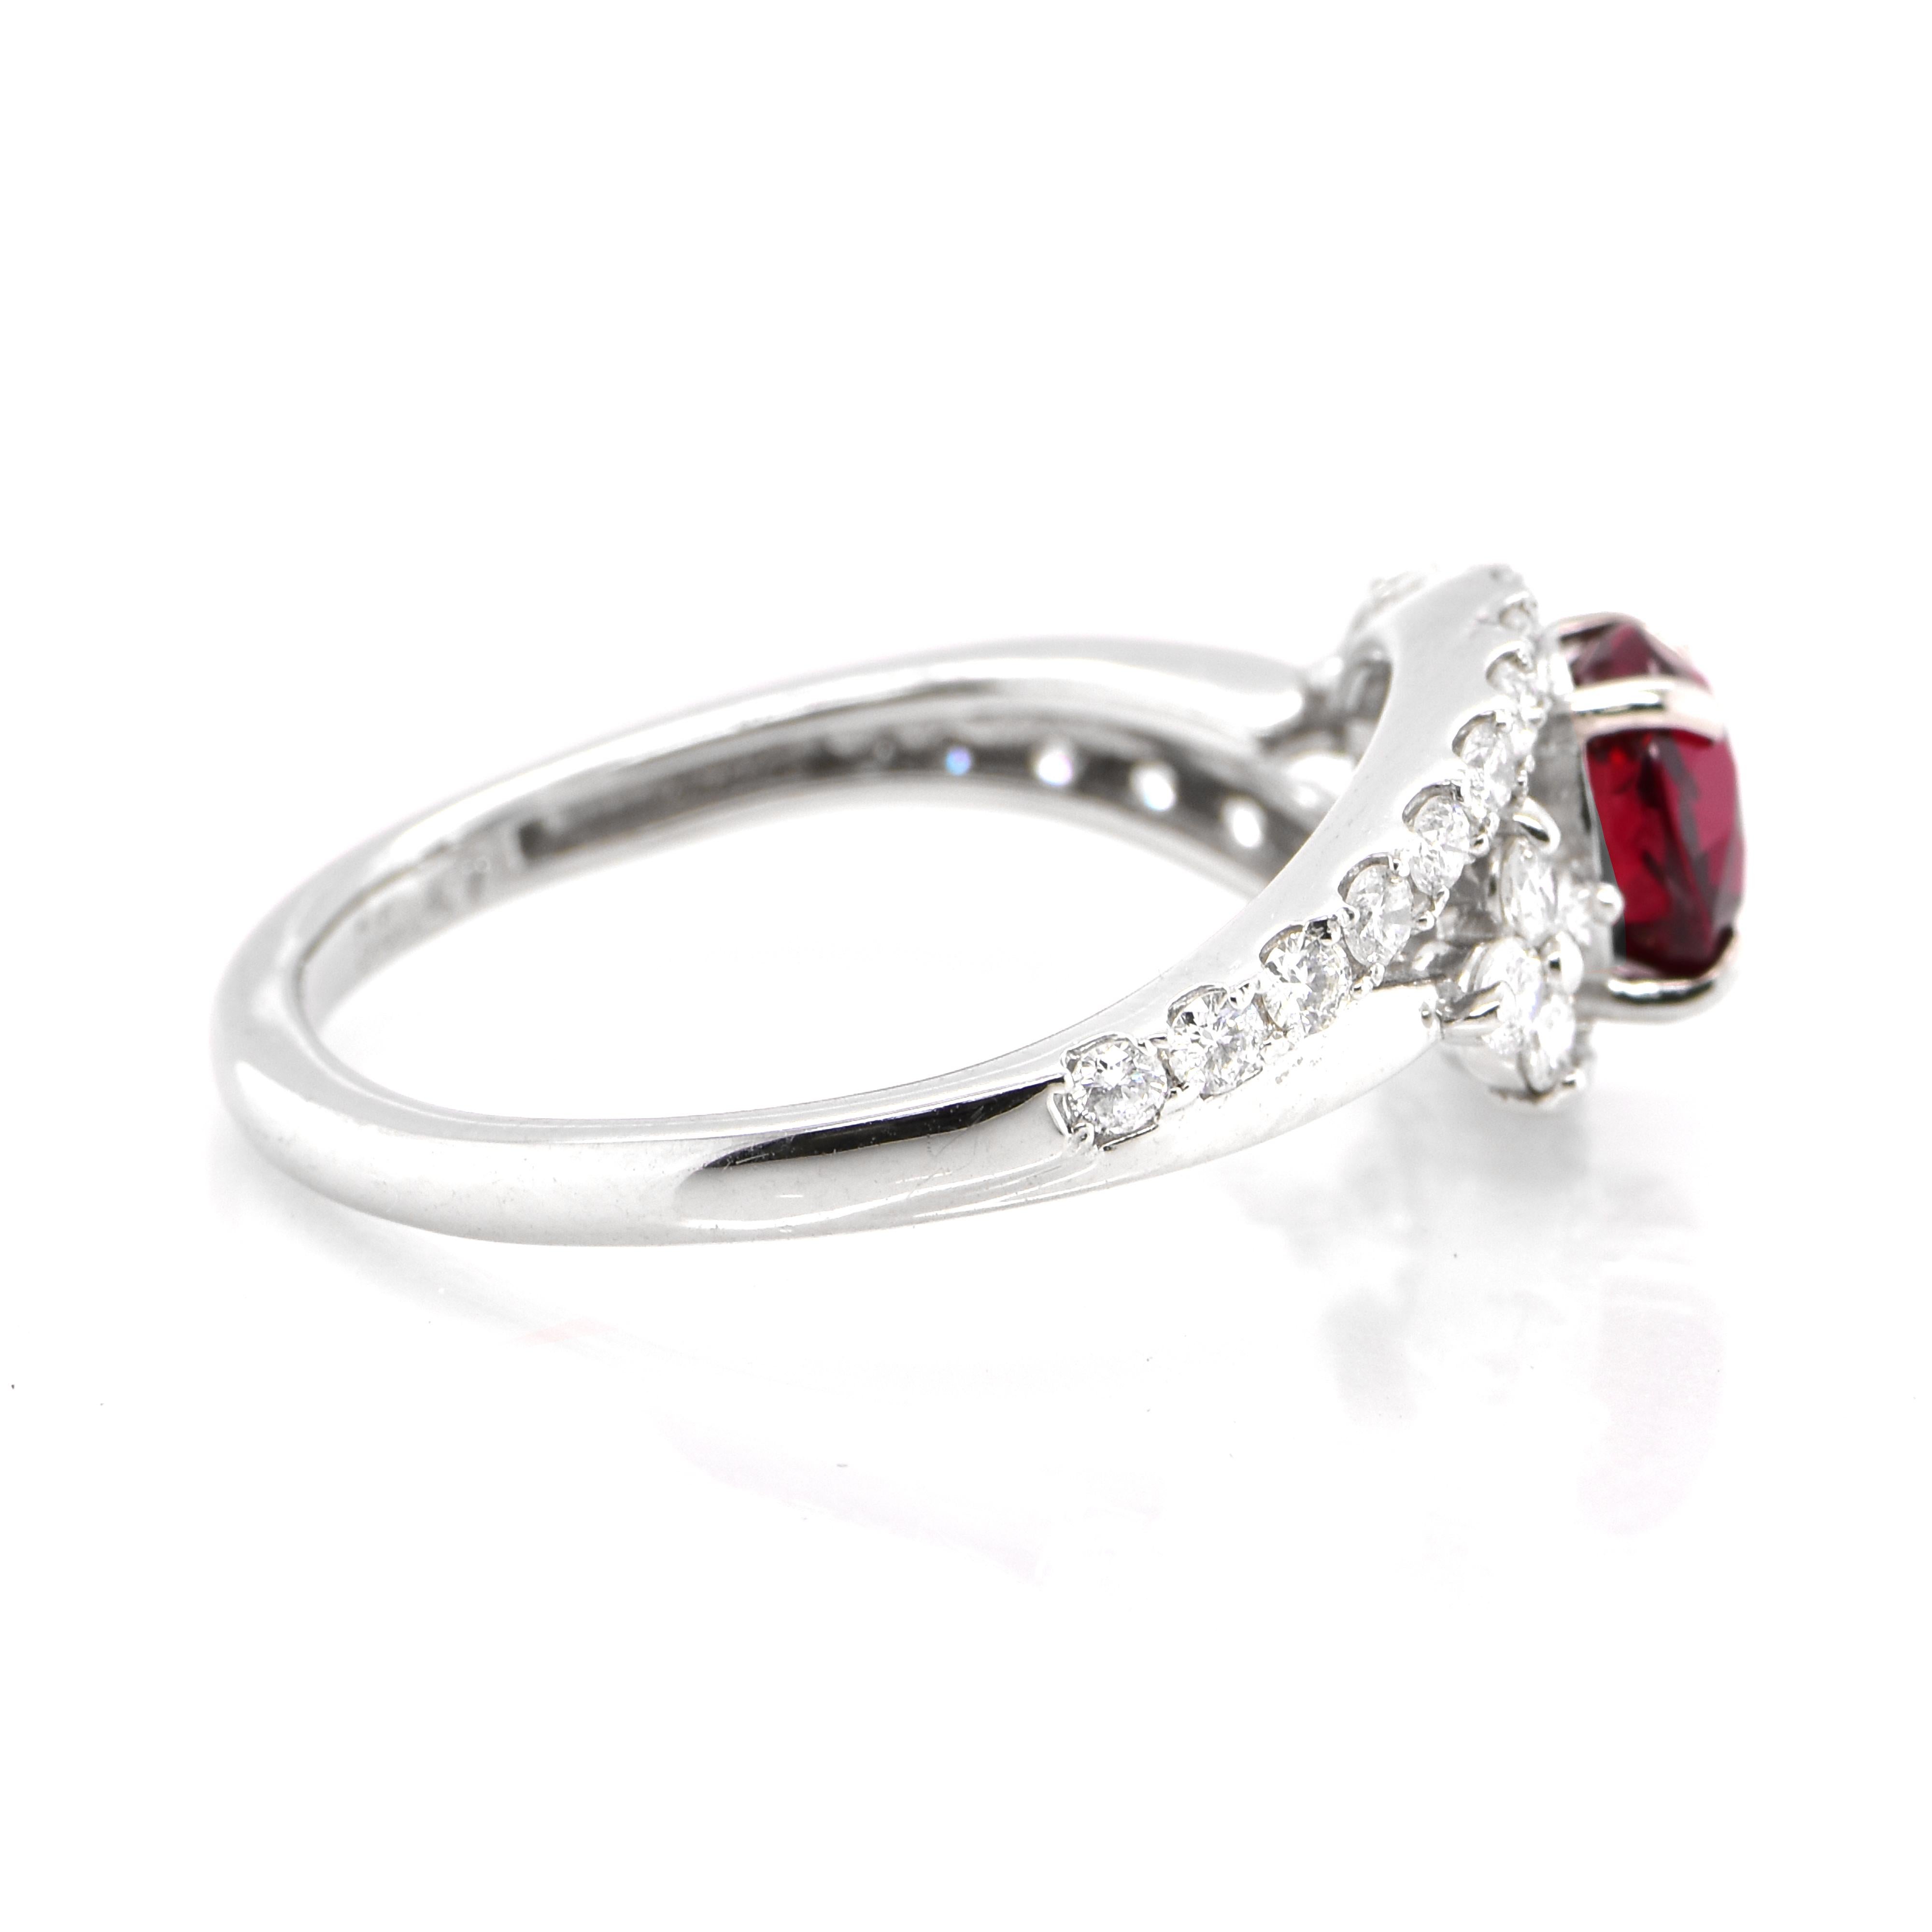 Oval Cut 1.03 Carat Natural Vivid-Red Ruby and Diamond Ring Made in Platinum For Sale